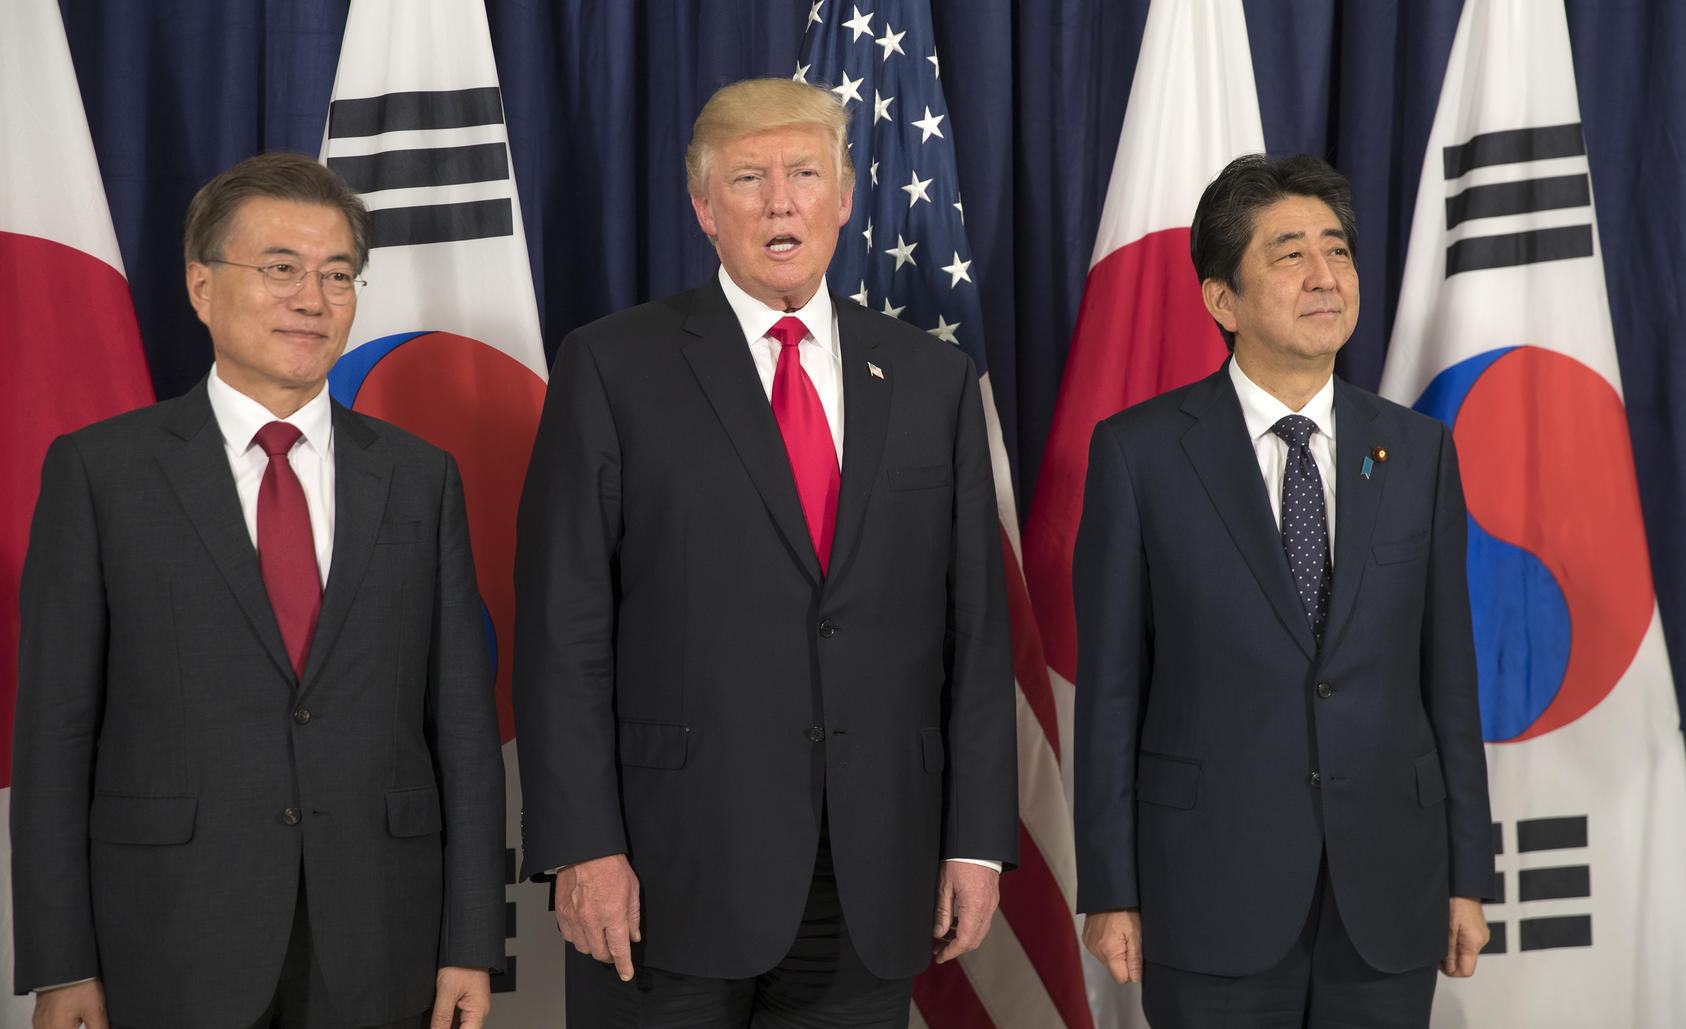 President Donald Trump with President Moon Jae-in of South Korea, left, and Prime Minister Shinzo Abe of Japan, during the G20 summit in Hamburg, Germany, July 6, 2017. As the three allies prepared to meet on the sidelines of the United Nations General Assembly in September, Moon' softer stance towards North Korea has made him the odd man out. (Stephen Crowley/The New York Times)